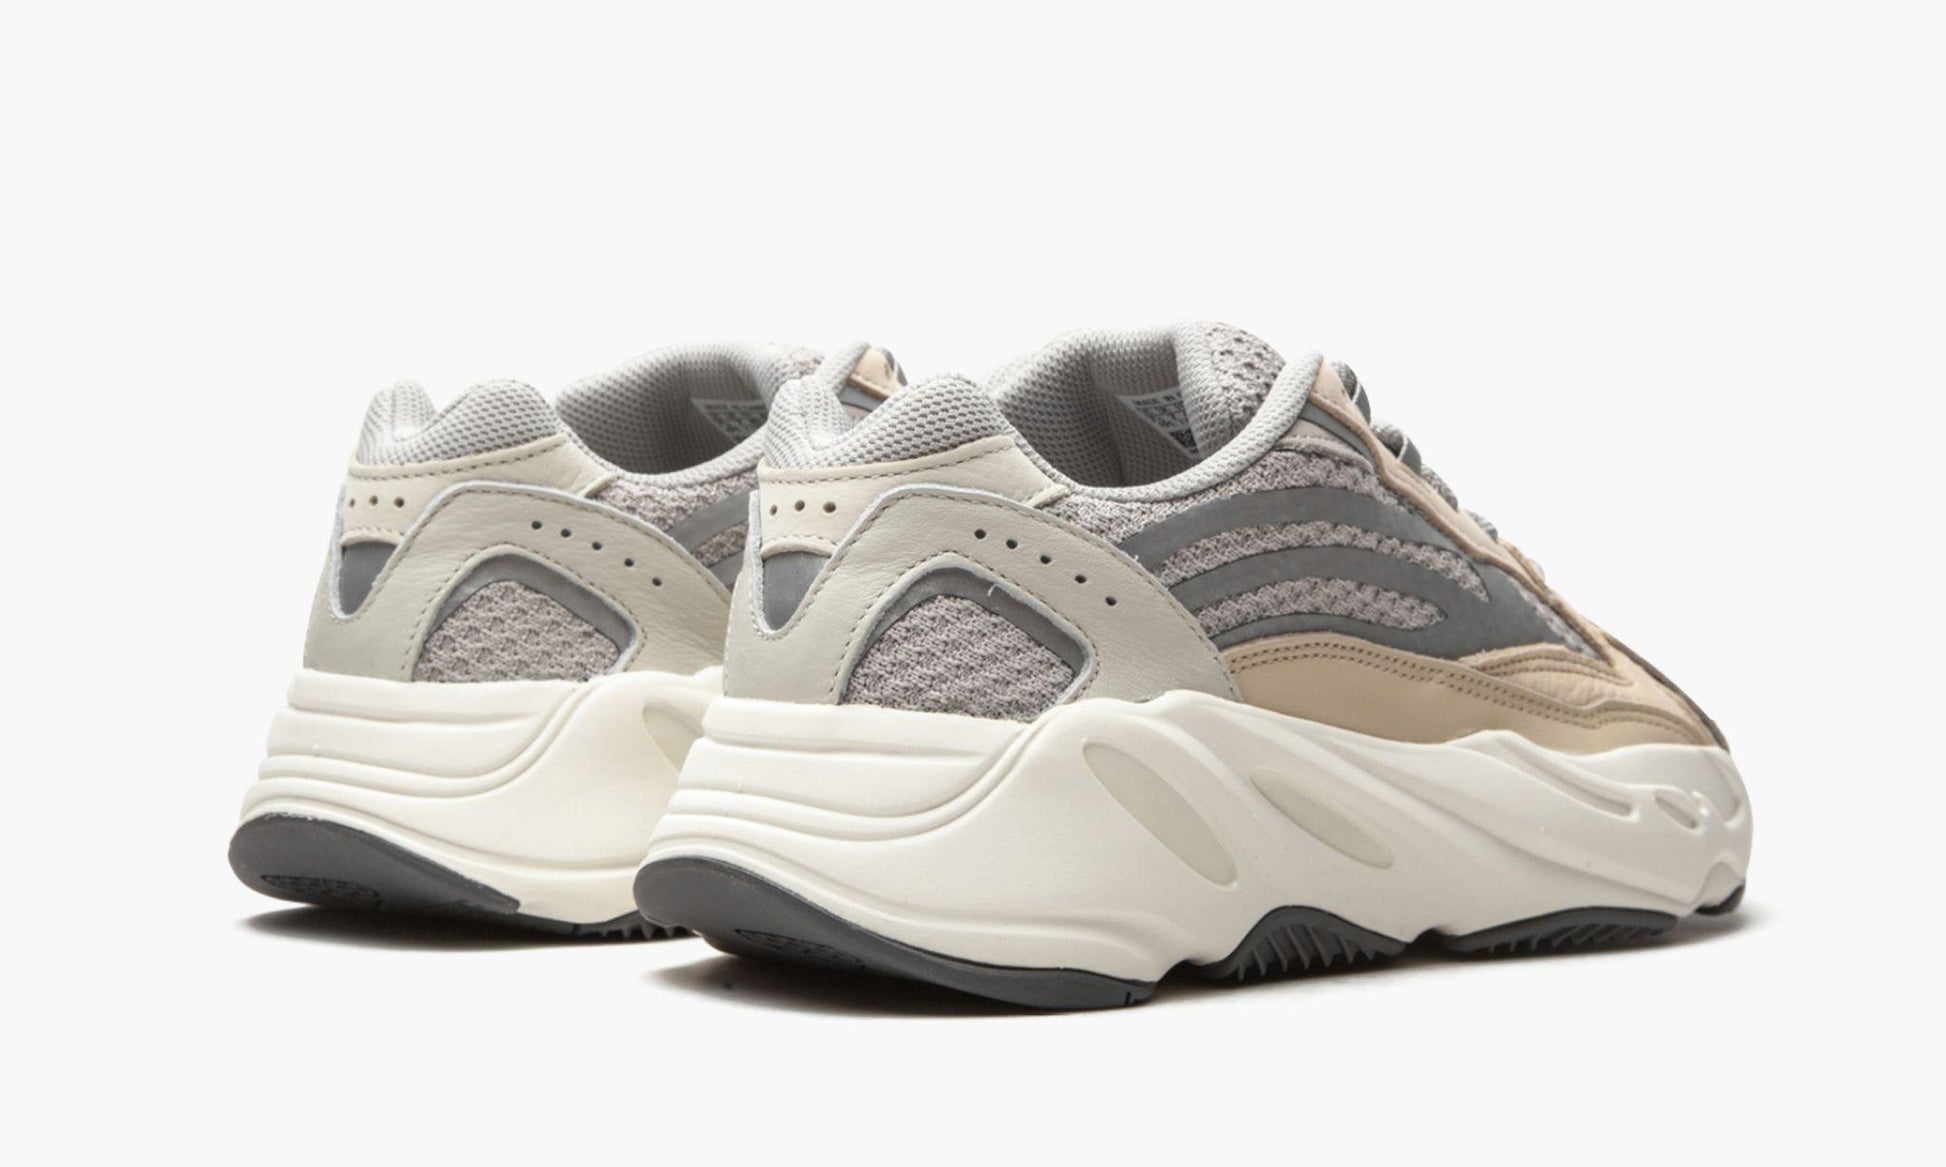 Adidas Yeezy Boost 700 V2 Men's Running Shoes - CADEAUME